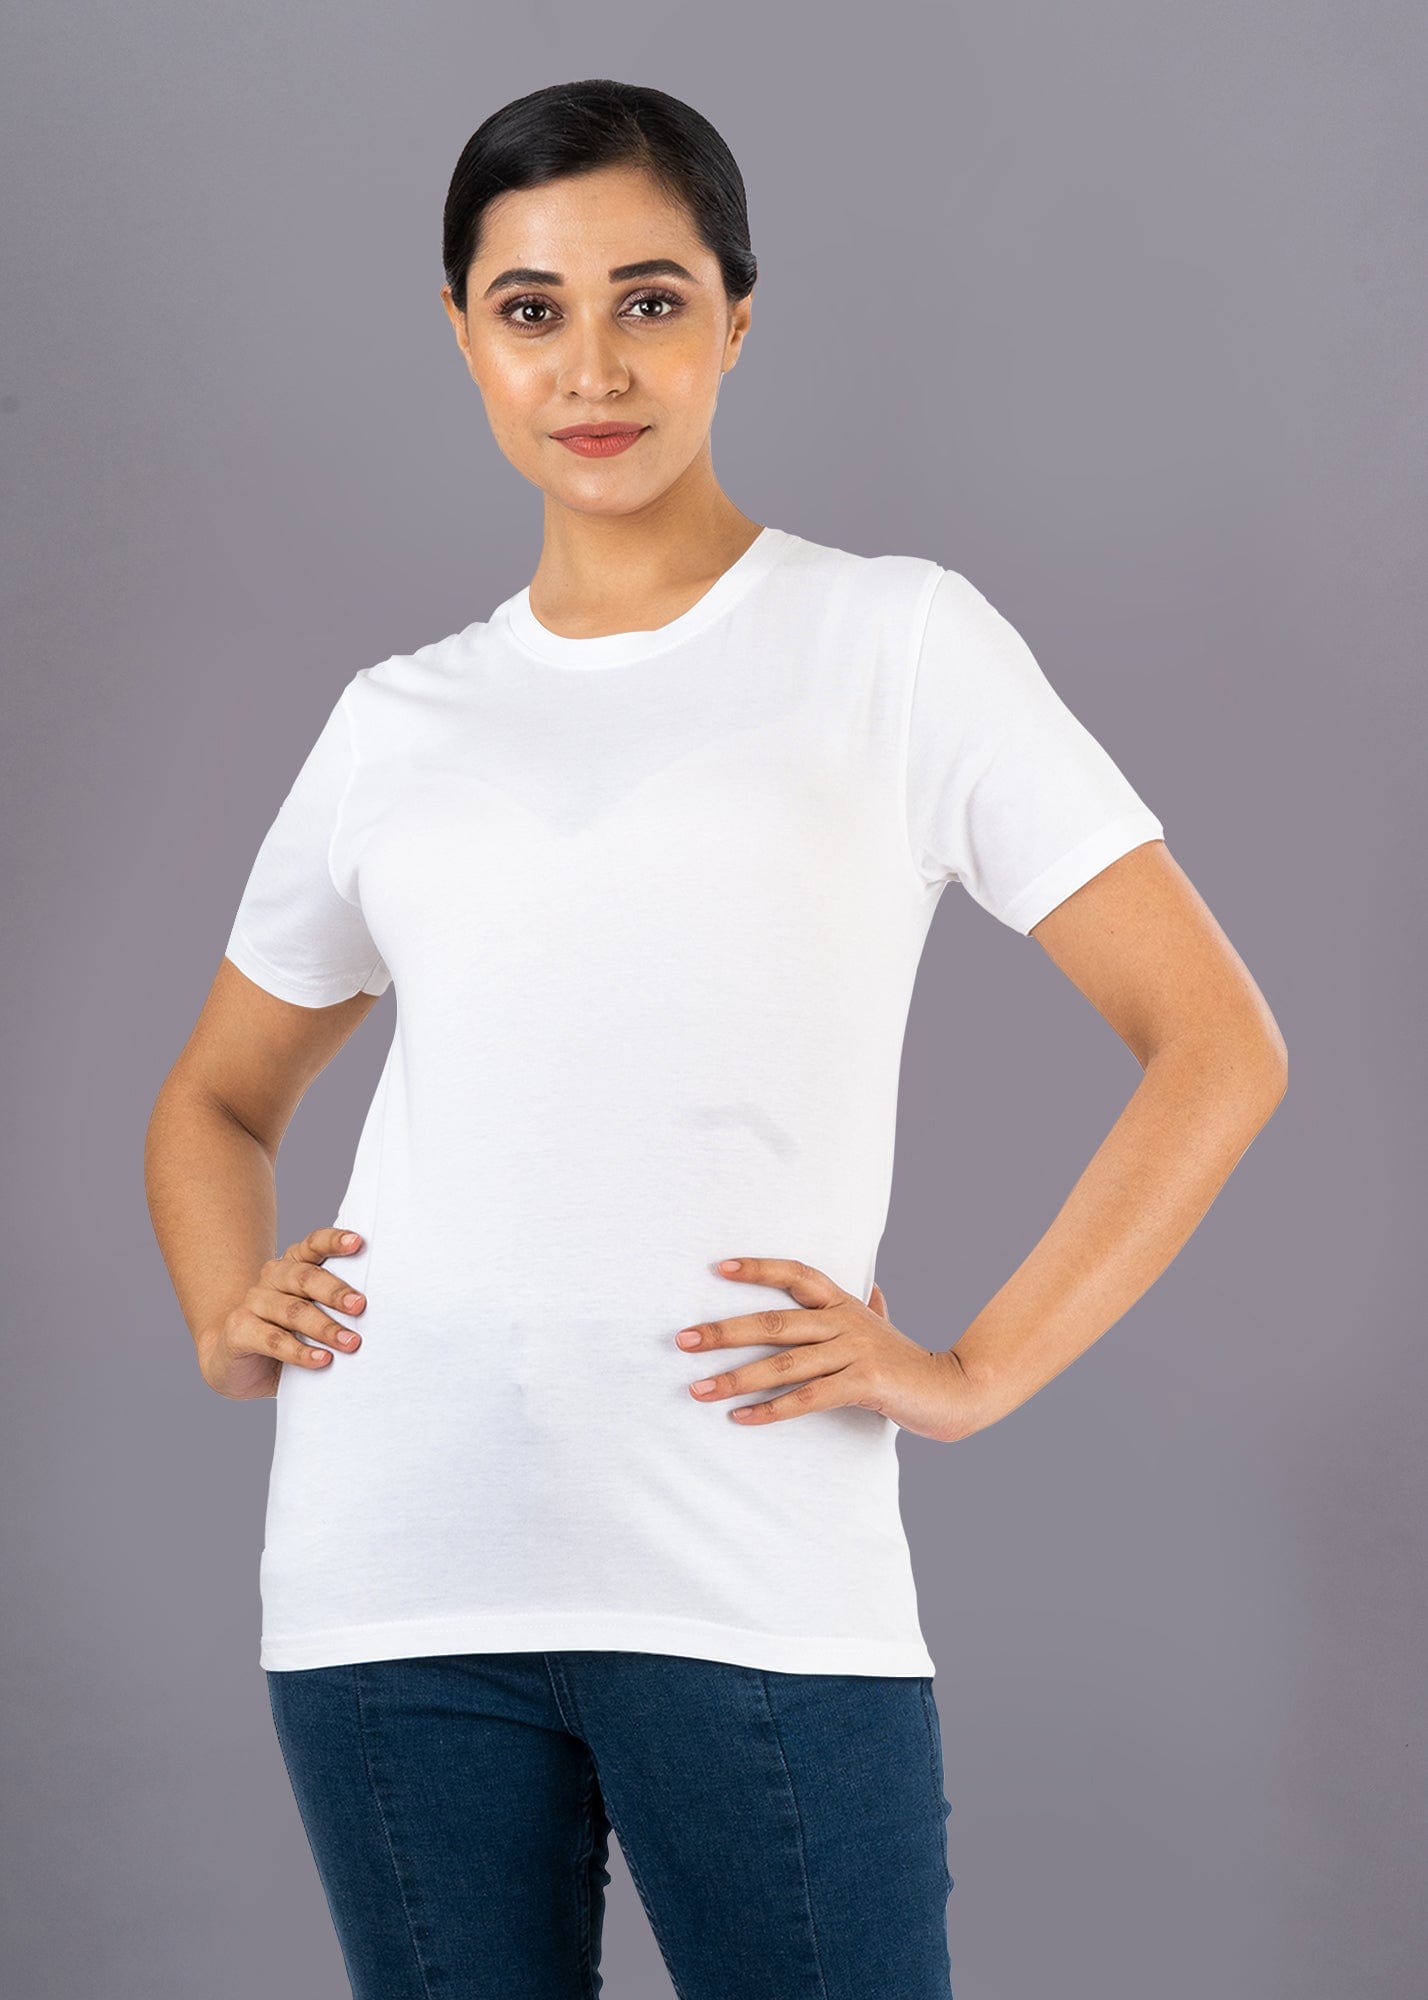 Solid Half Sleeve Premium Cotton Regular Fit T-Shirt For Women - Pack Of 2